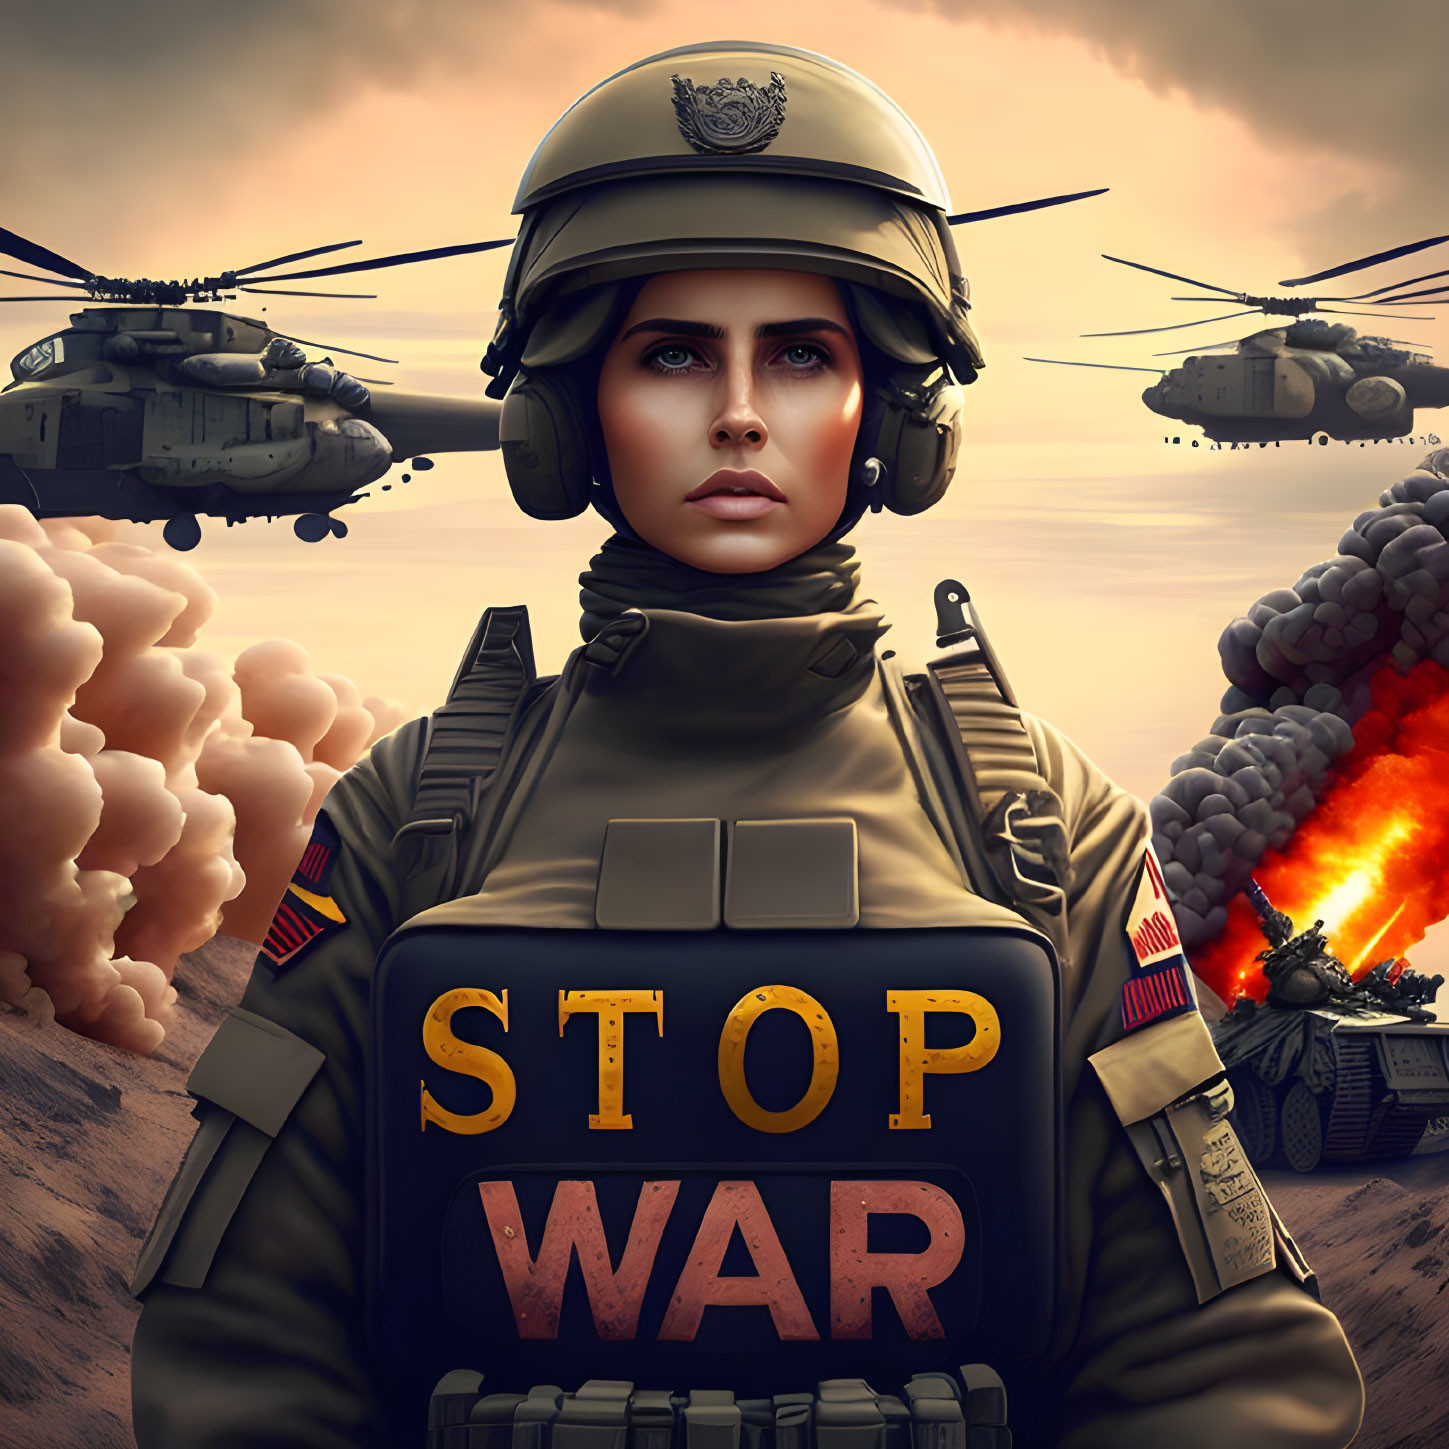 STOP THE WAR! Feel free to use this worldwide!